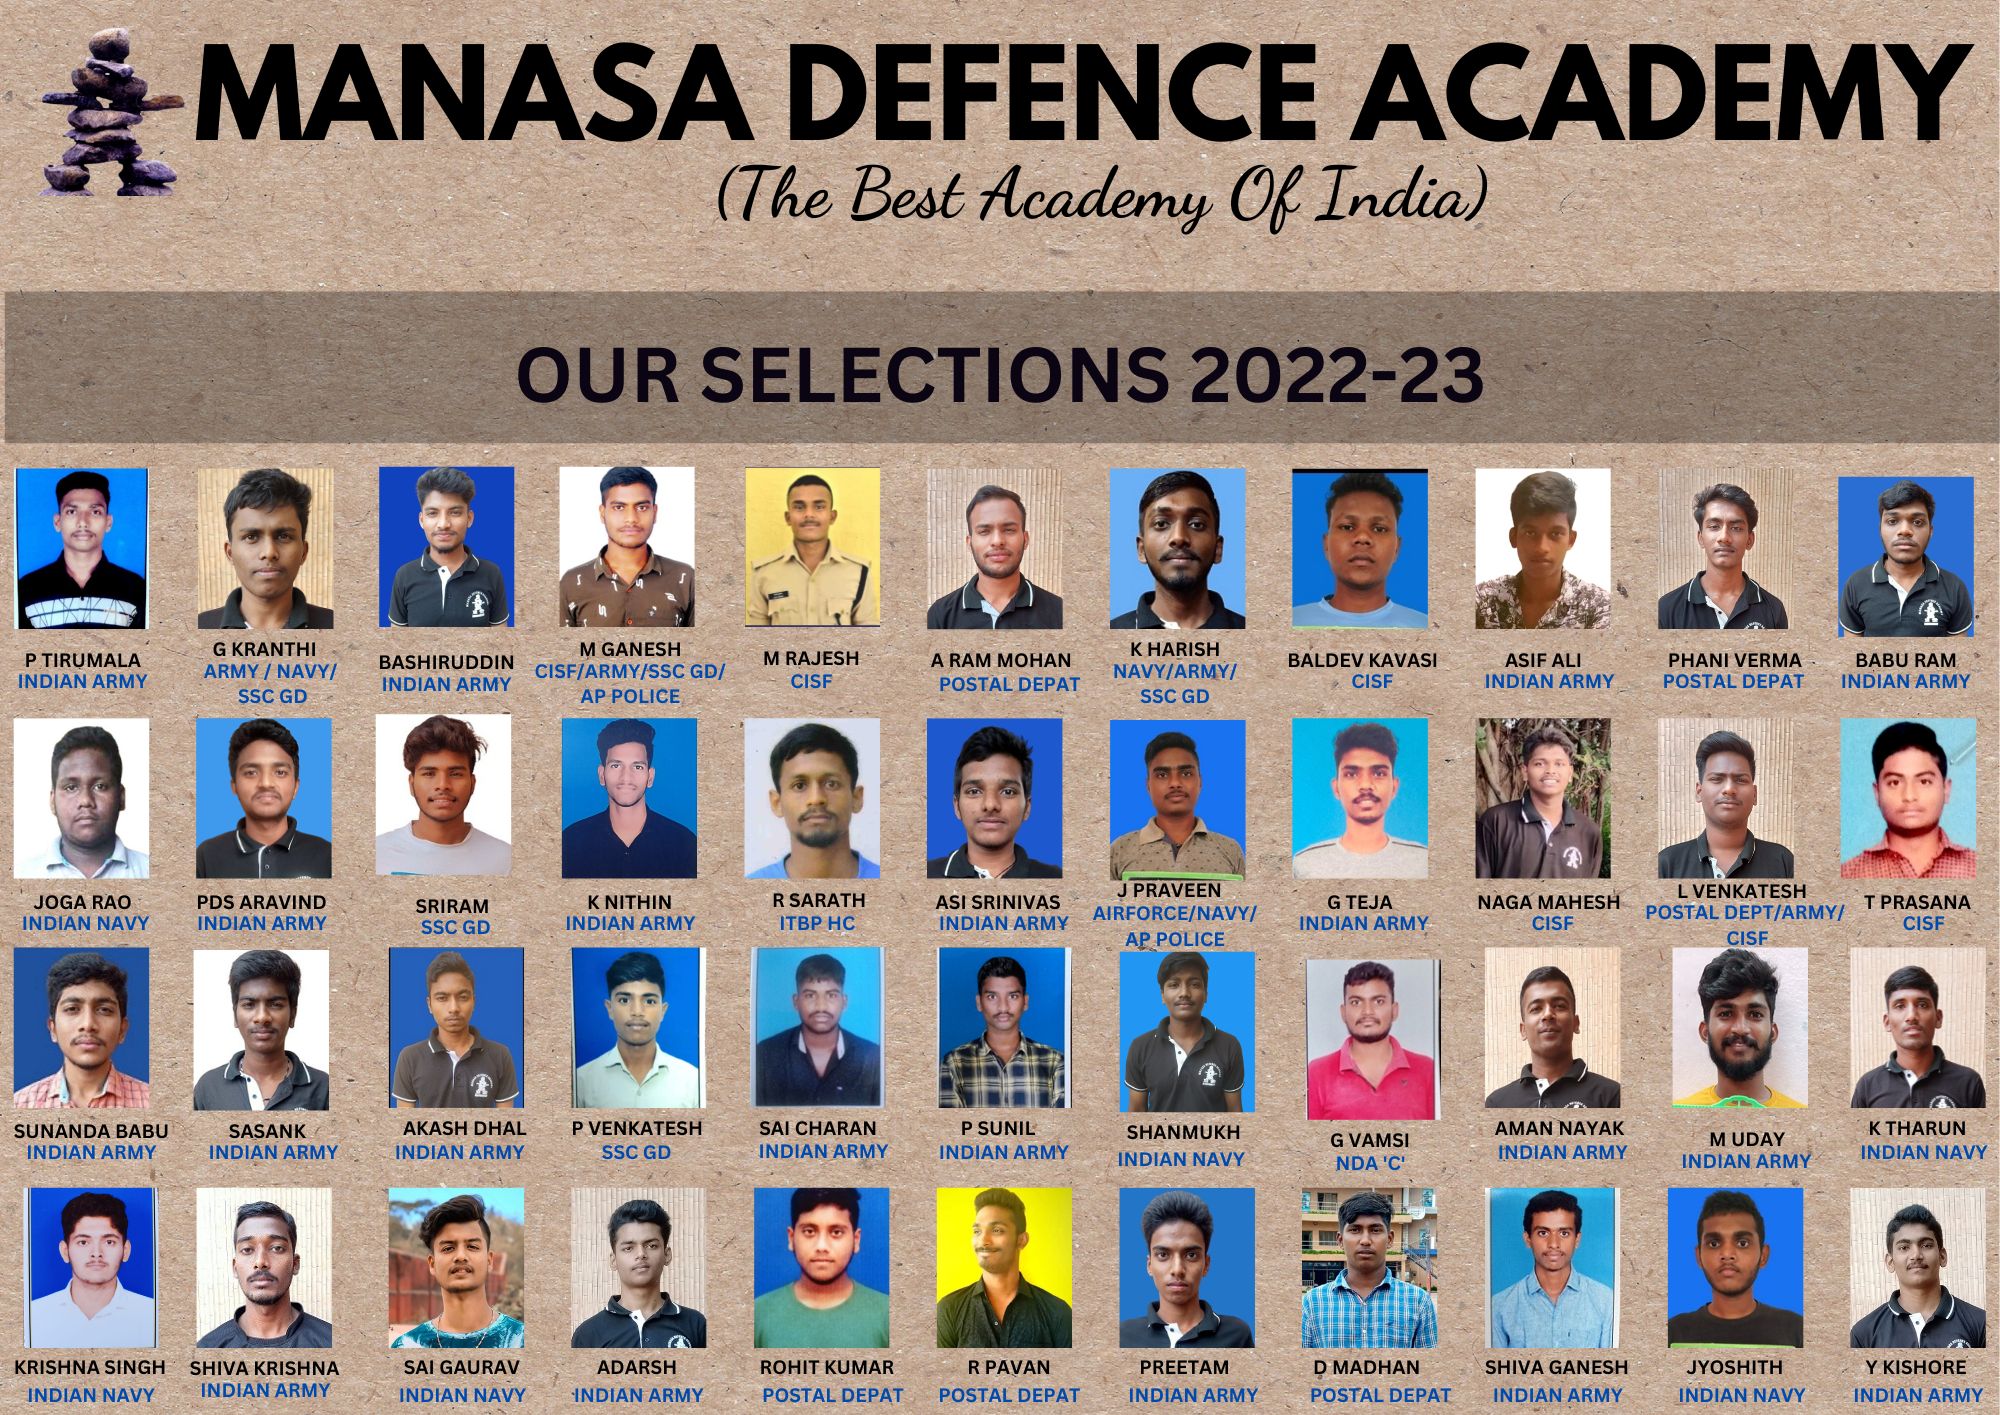 Total selected students MDA